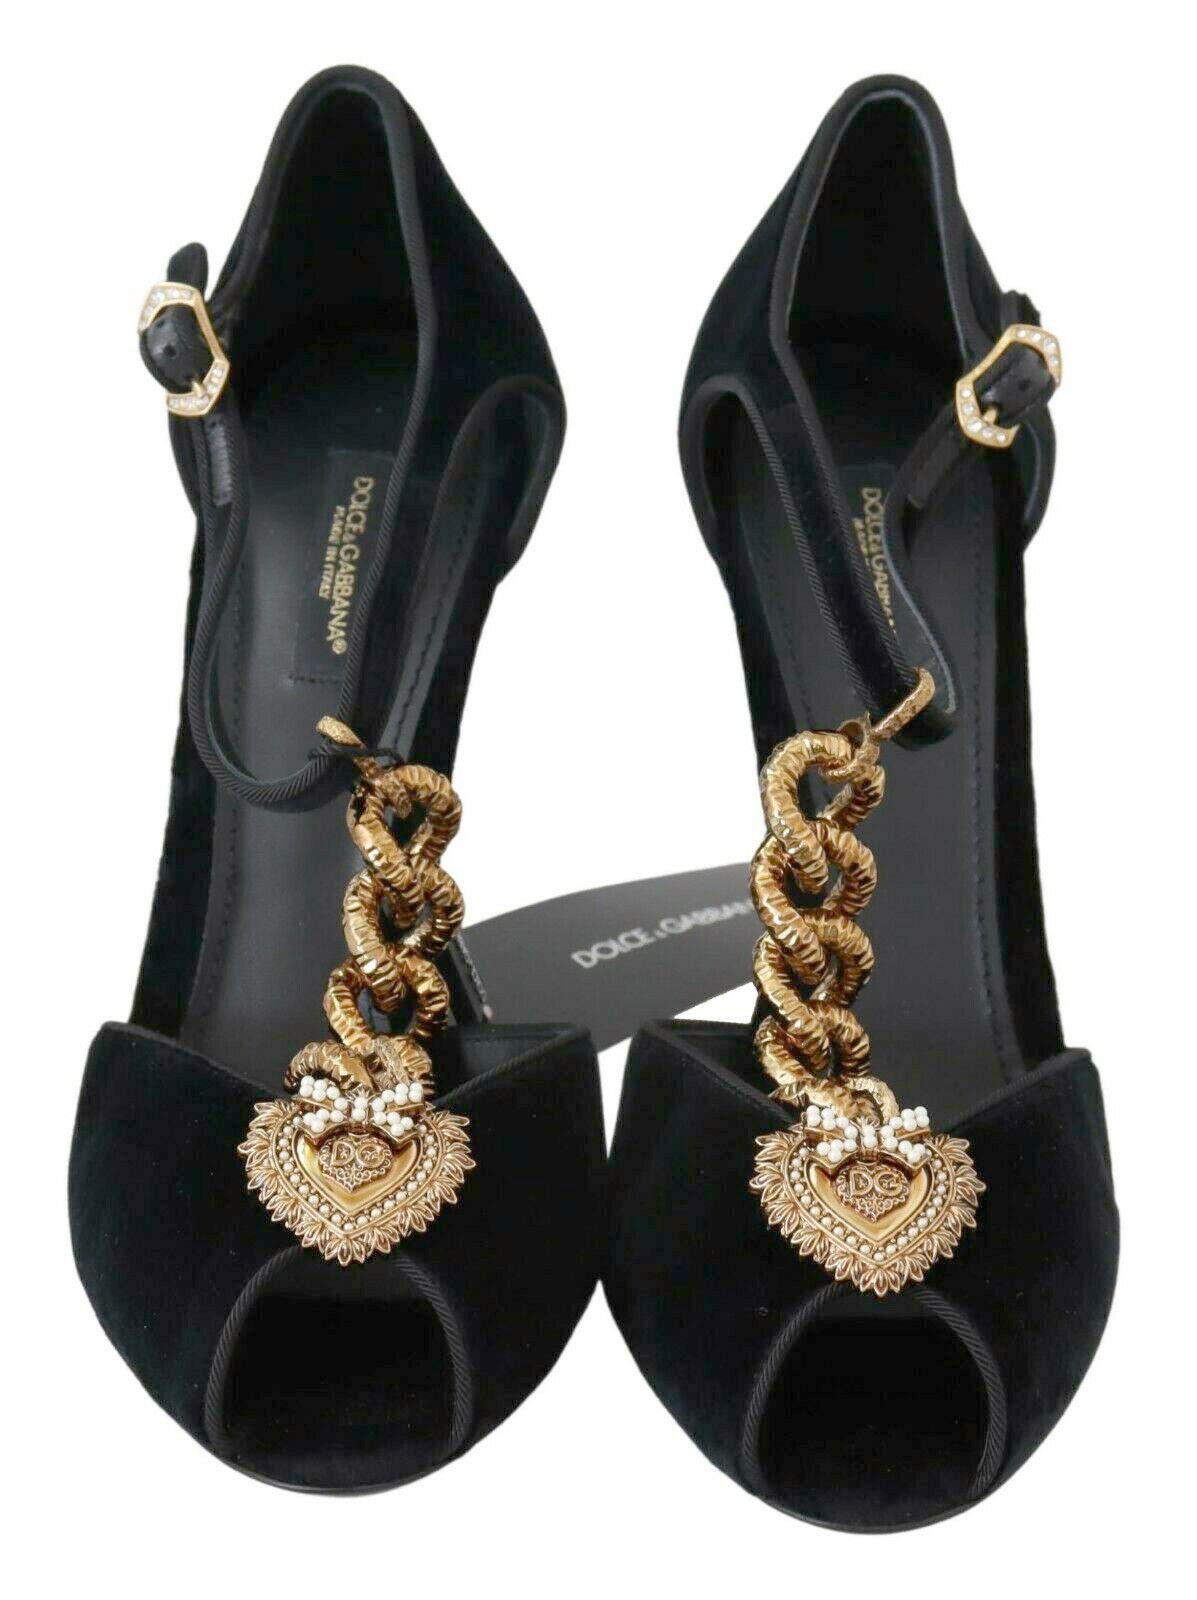 Women's Dolce & Gabbana Black Gold Mary Jane Shoes Heels Pumps With DG Logo Heart Pearls